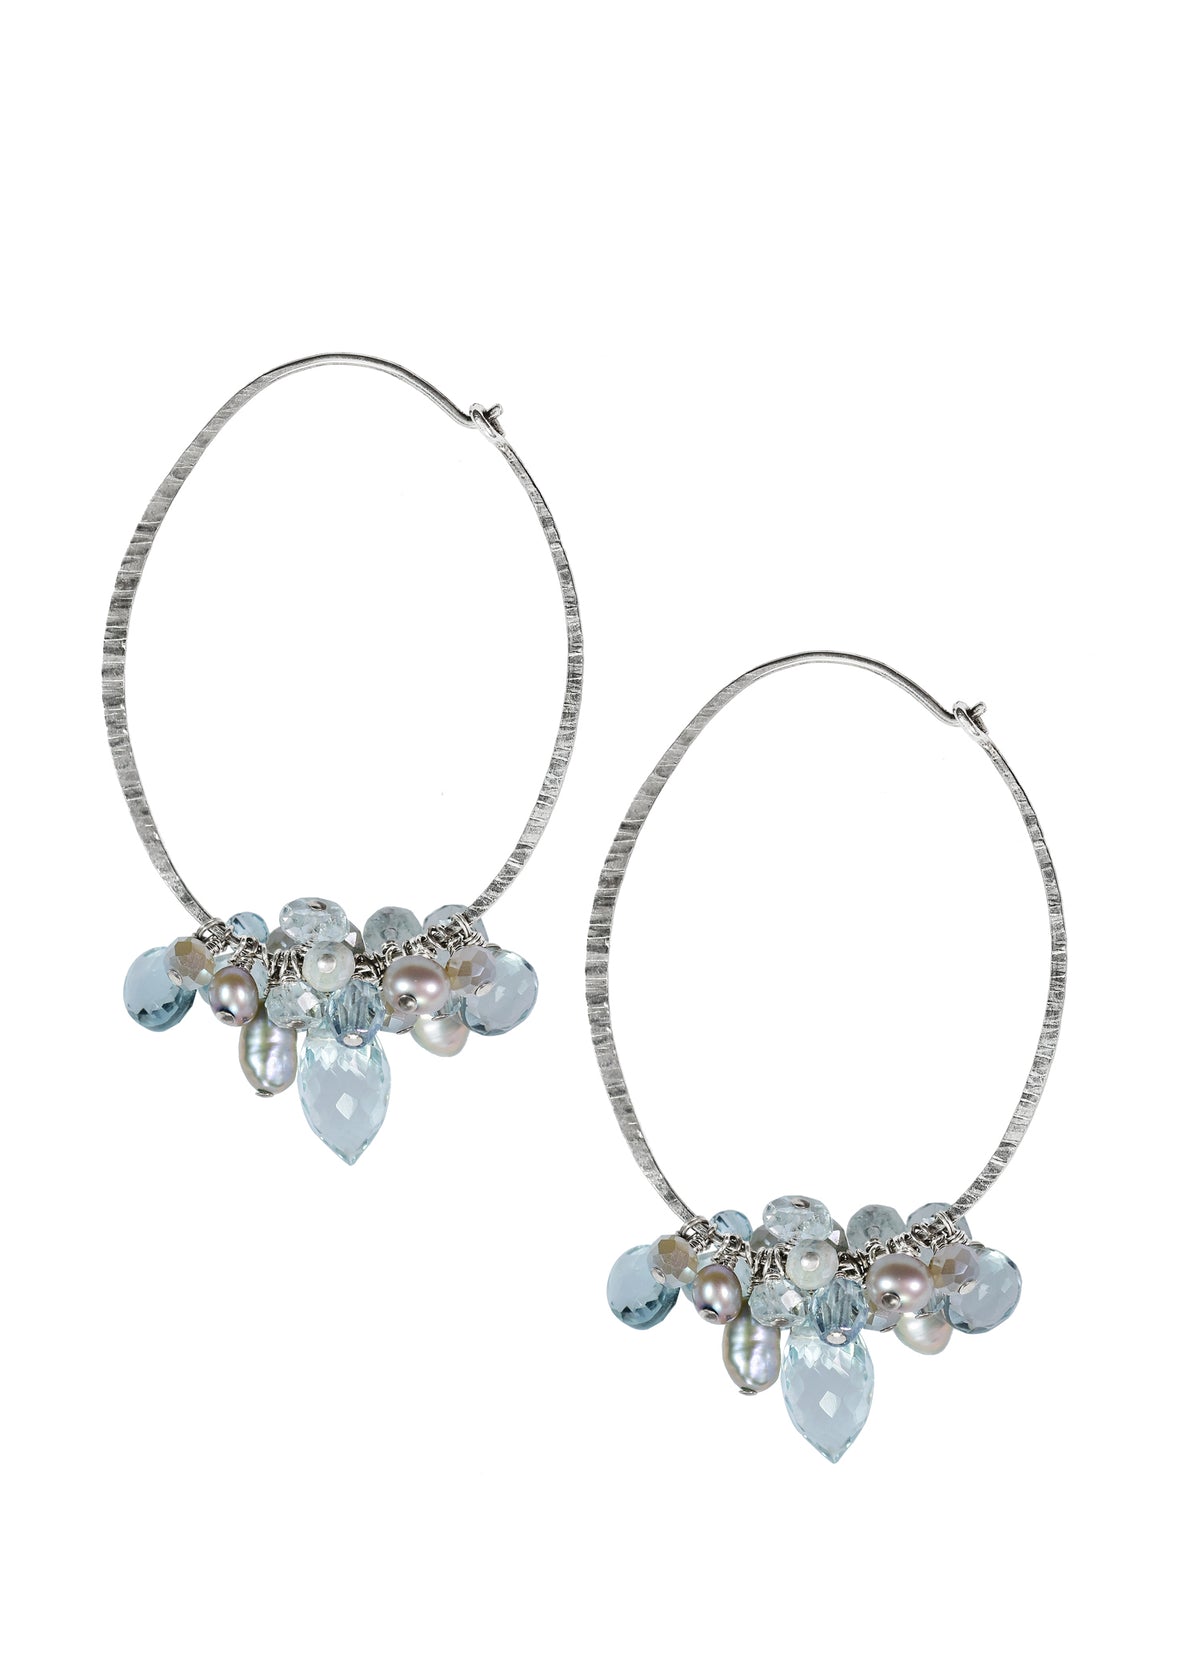 Aqua quartz Corundum Freshwater pearl Crystal Sterling silver Earrings measure 2&quot; in length and 1-3/16&quot; in width across the widest point of the hoop Handmade in our Los Angeles studio